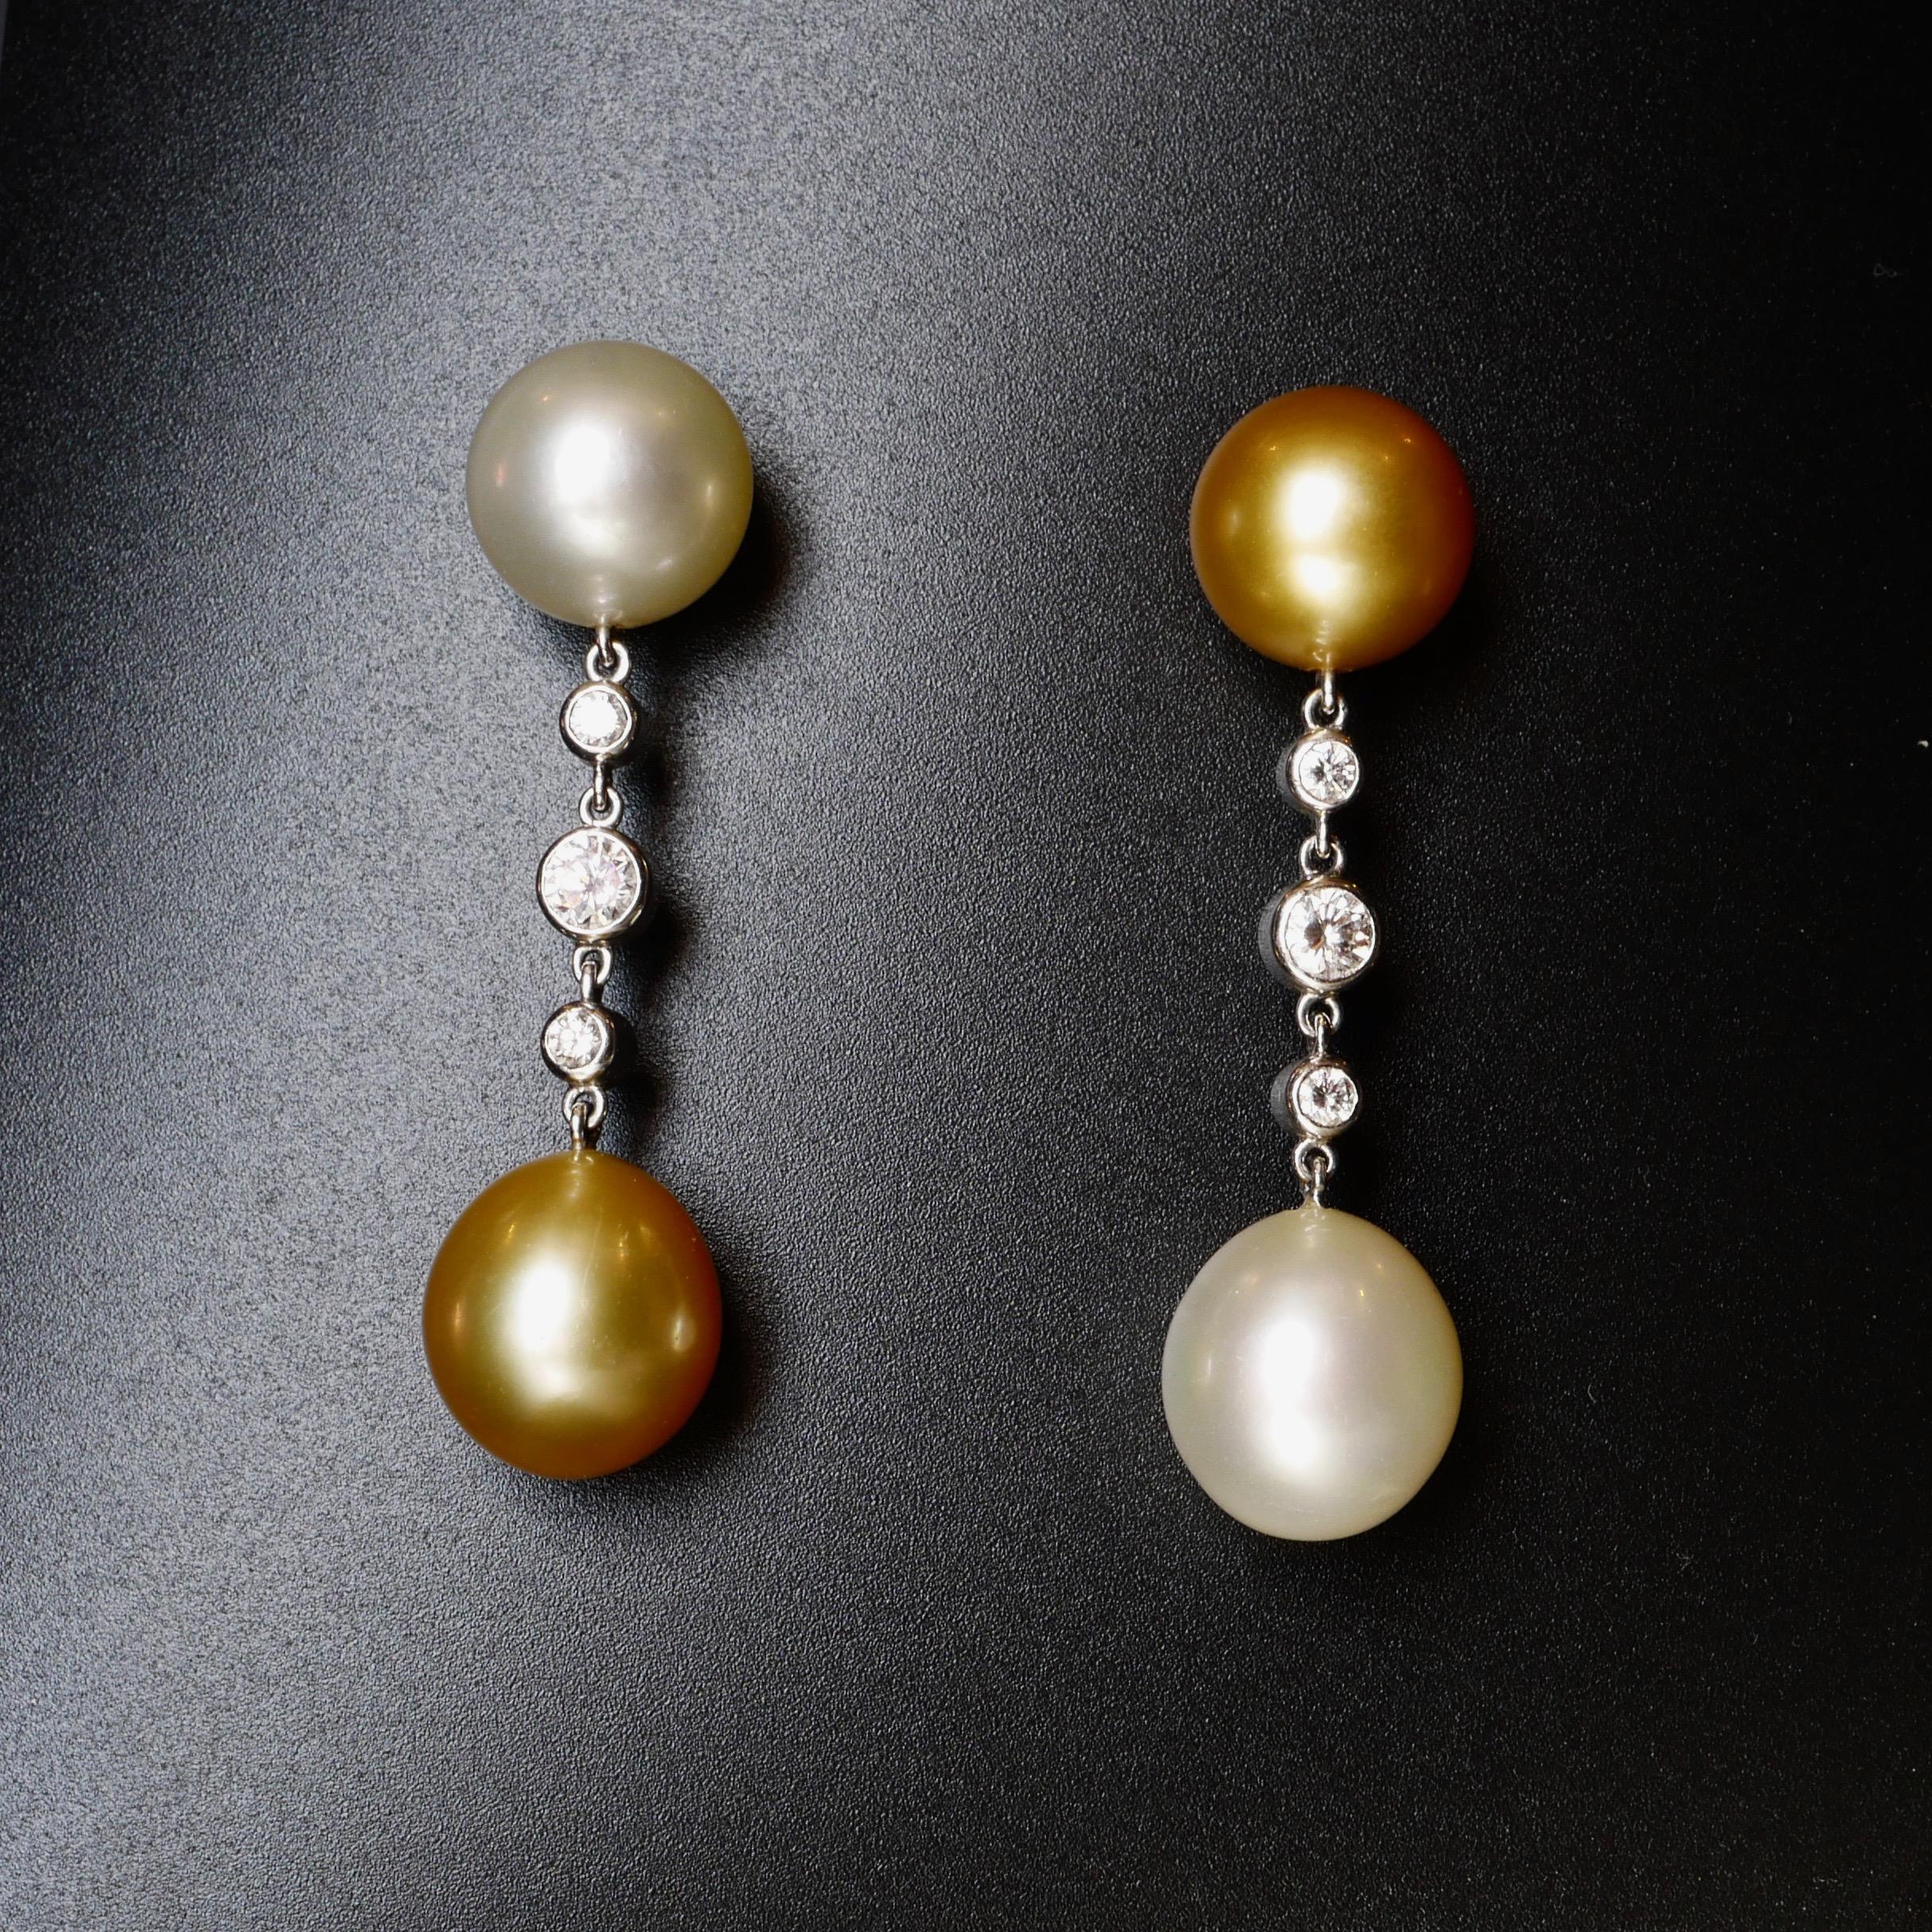 Golden and Ivory Toned South Sea Pearl and White Round Cut Diamond Drop Earrings In Excellent Condition For Sale In London, GB